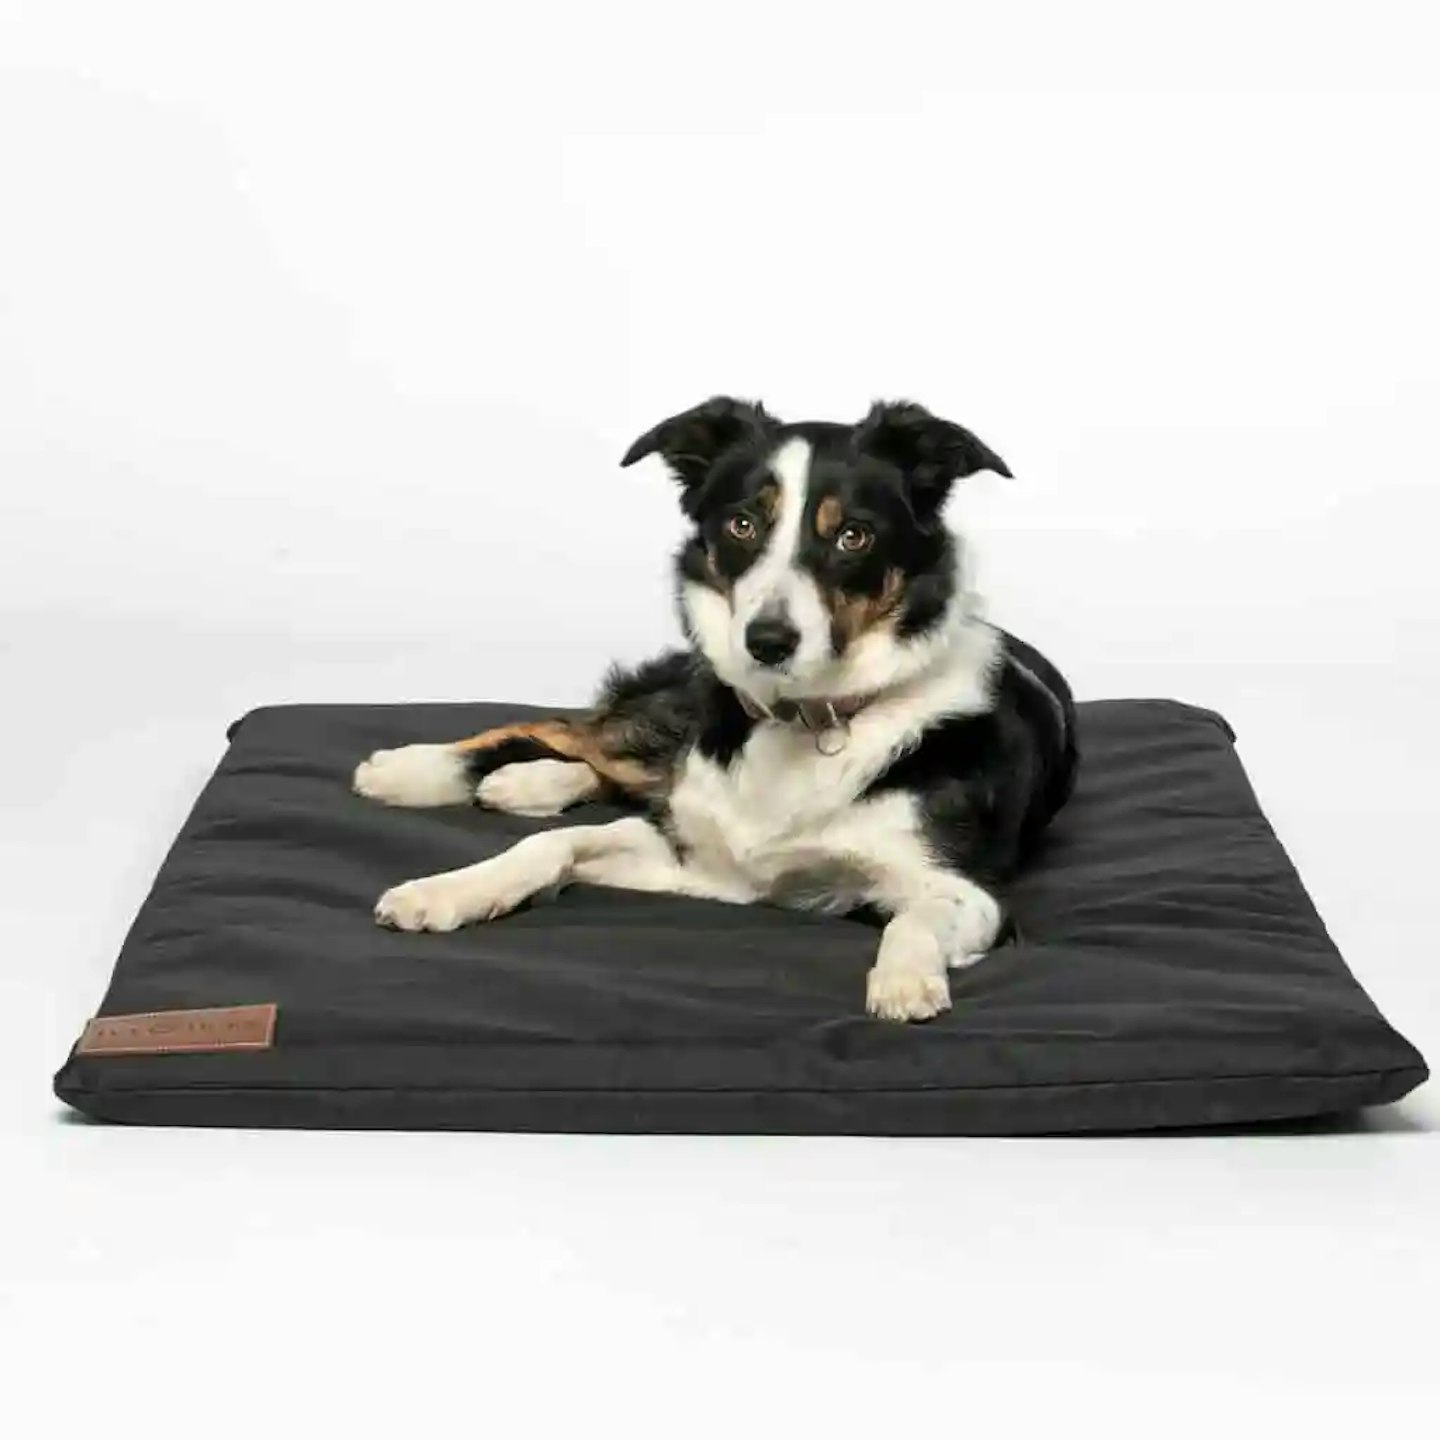 Best orthopaedic dog bed for travel